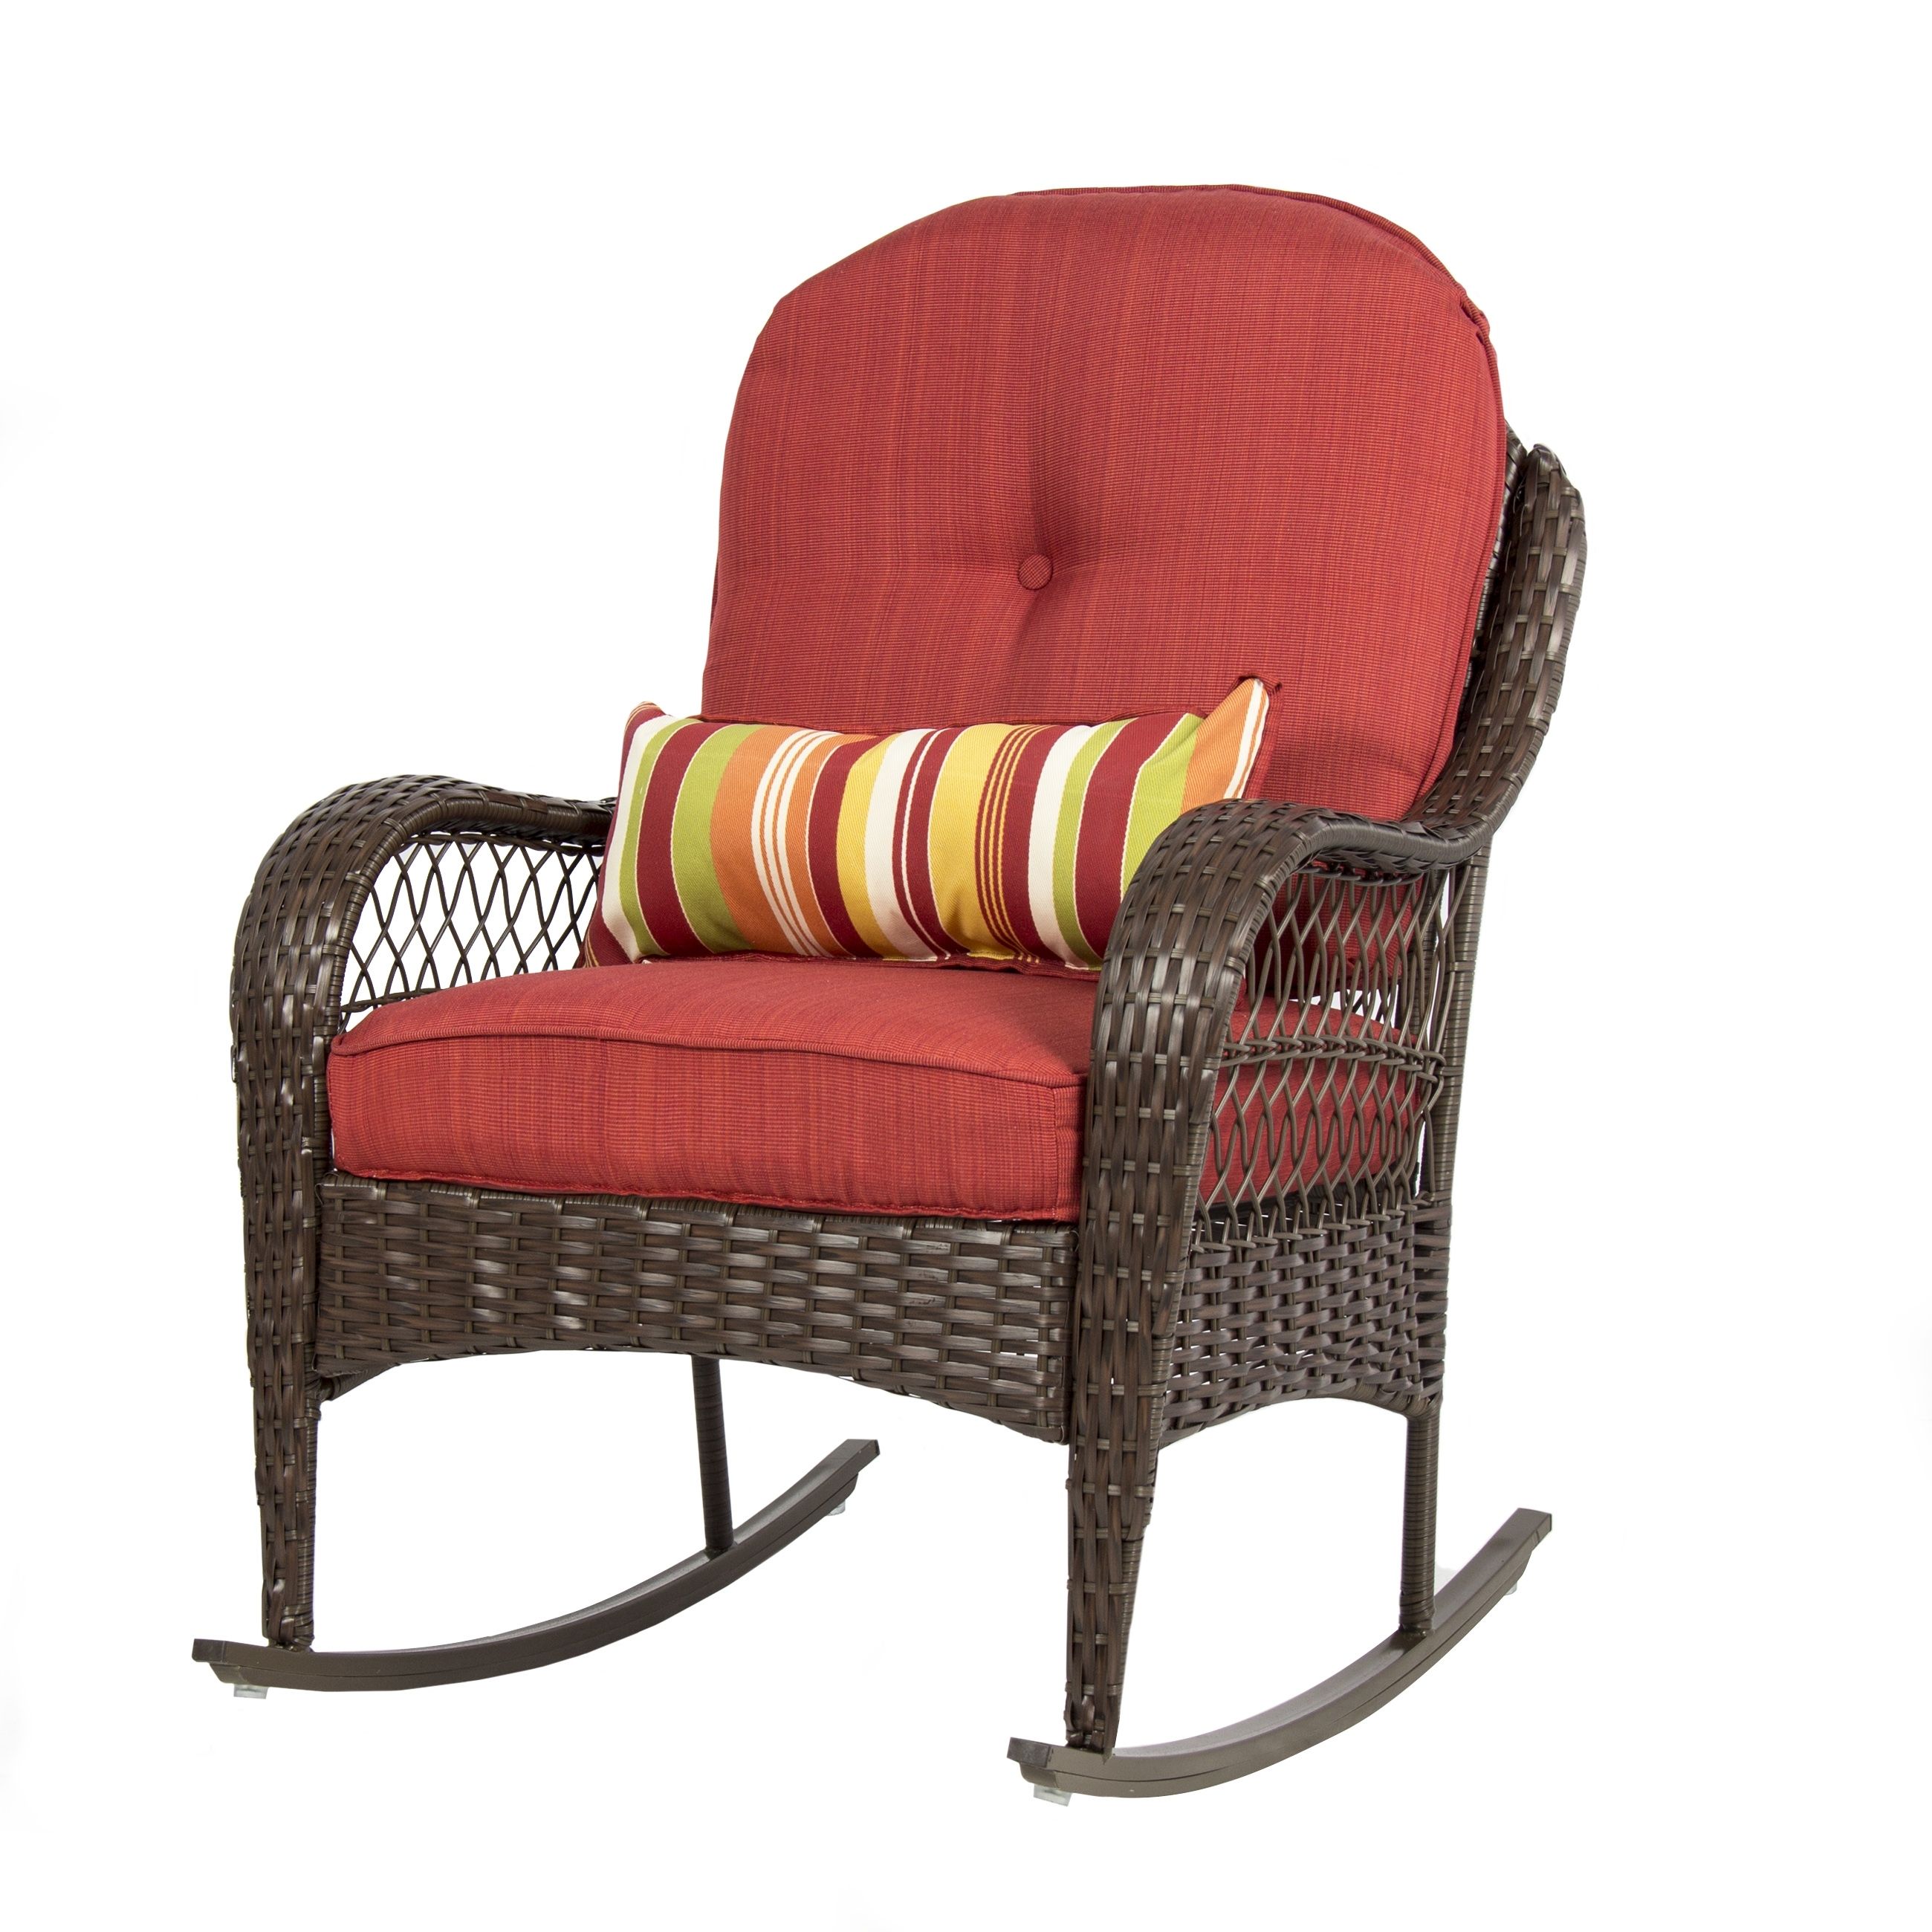 Rocking Chairs At Walmart Within Current Best Choice Products Wicker Rocking Chair Patio Porch Deck Furniture (View 1 of 20)